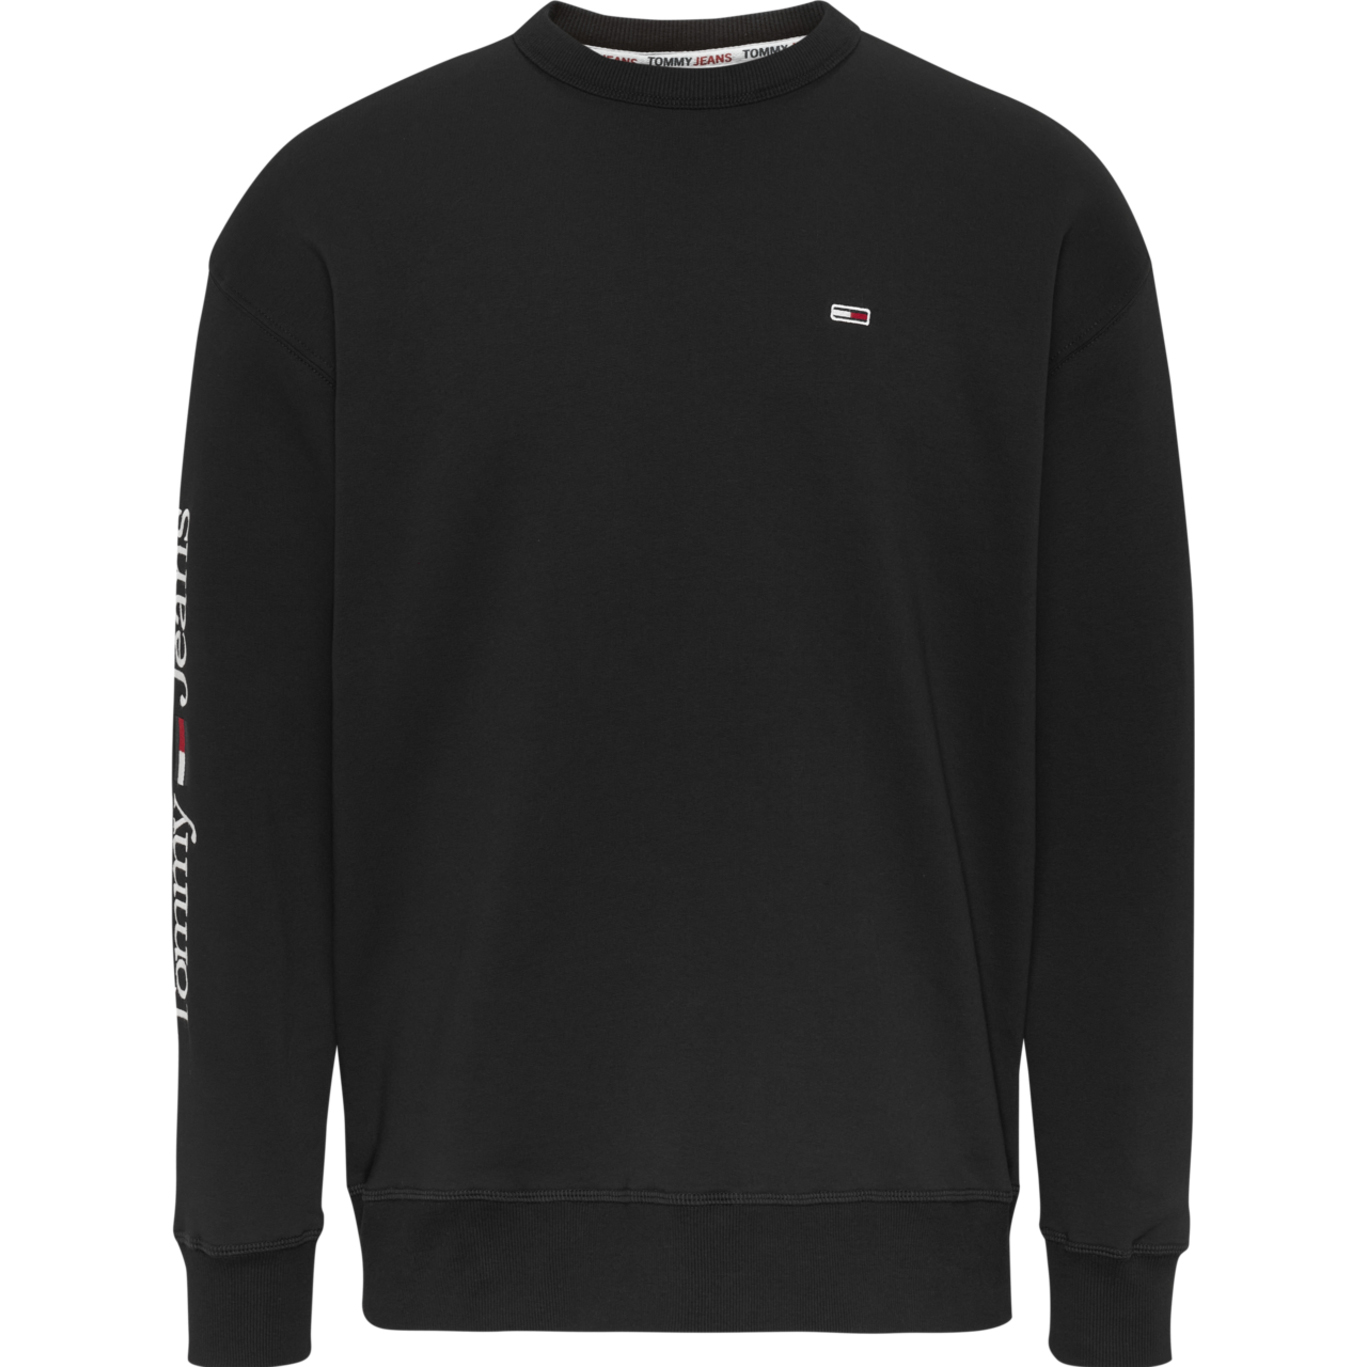 Reg Linear Placement Crew Sweater